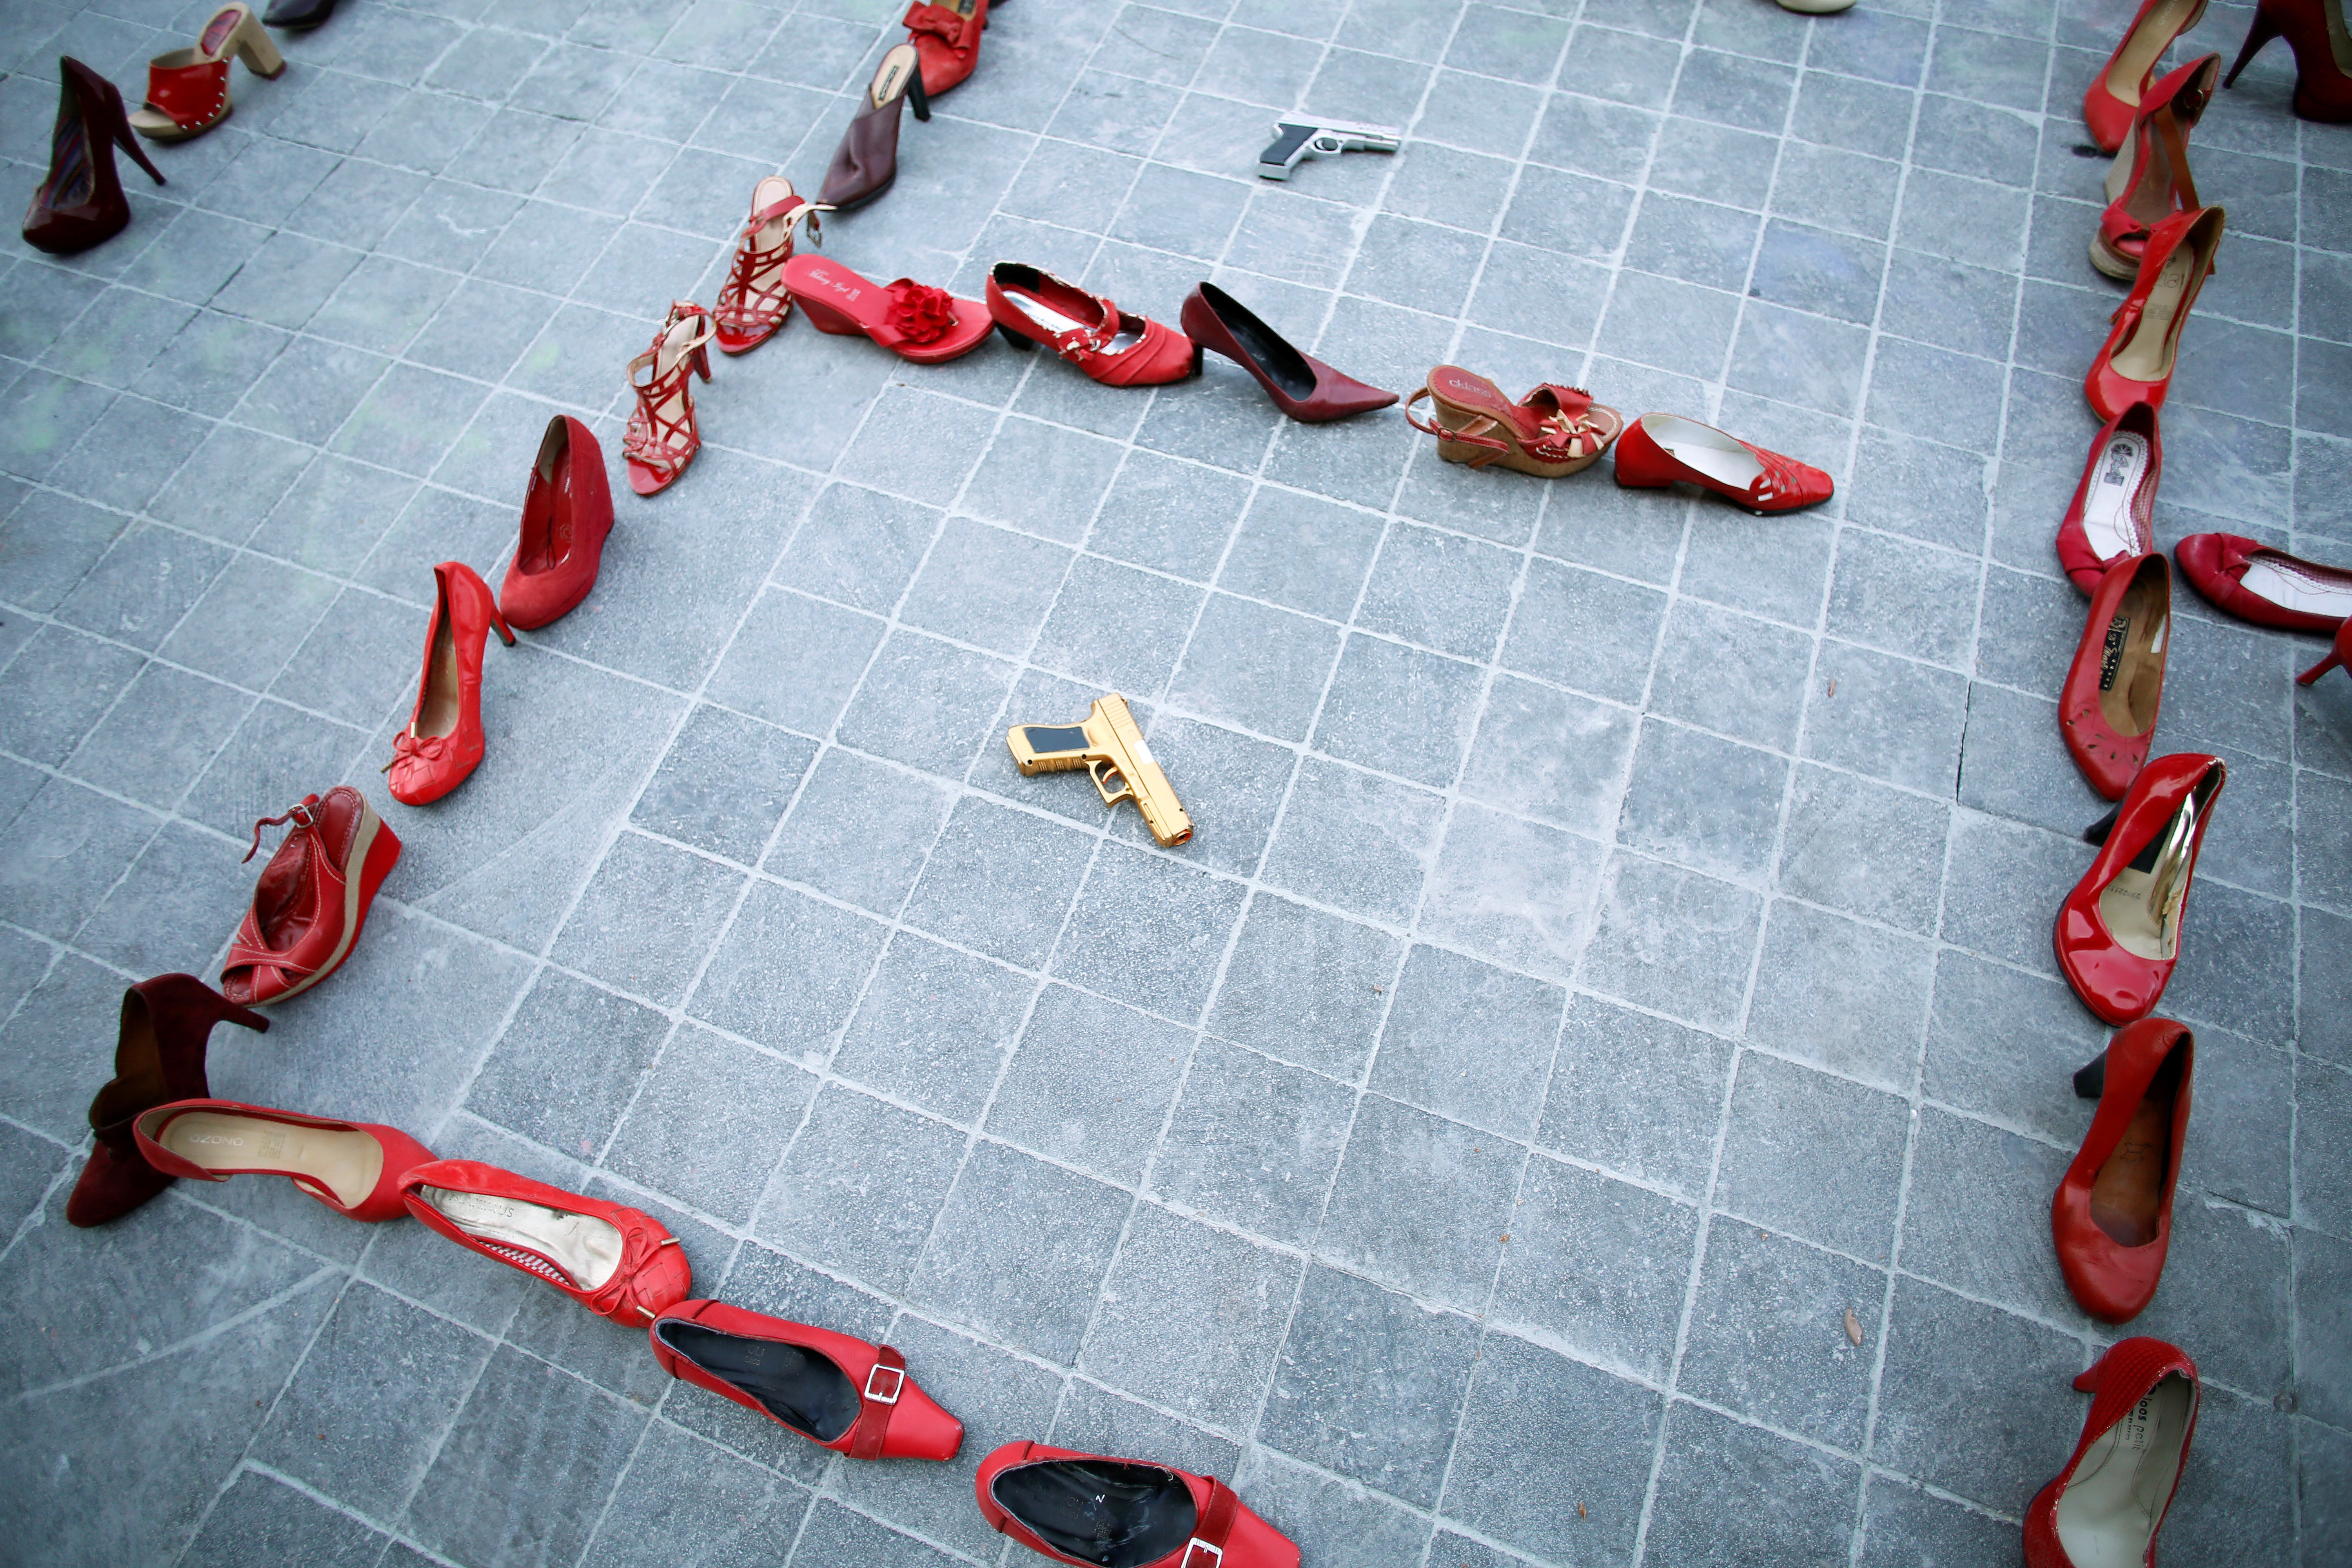 Pairs of women's red shoes are displayed next to a toy gun during the 